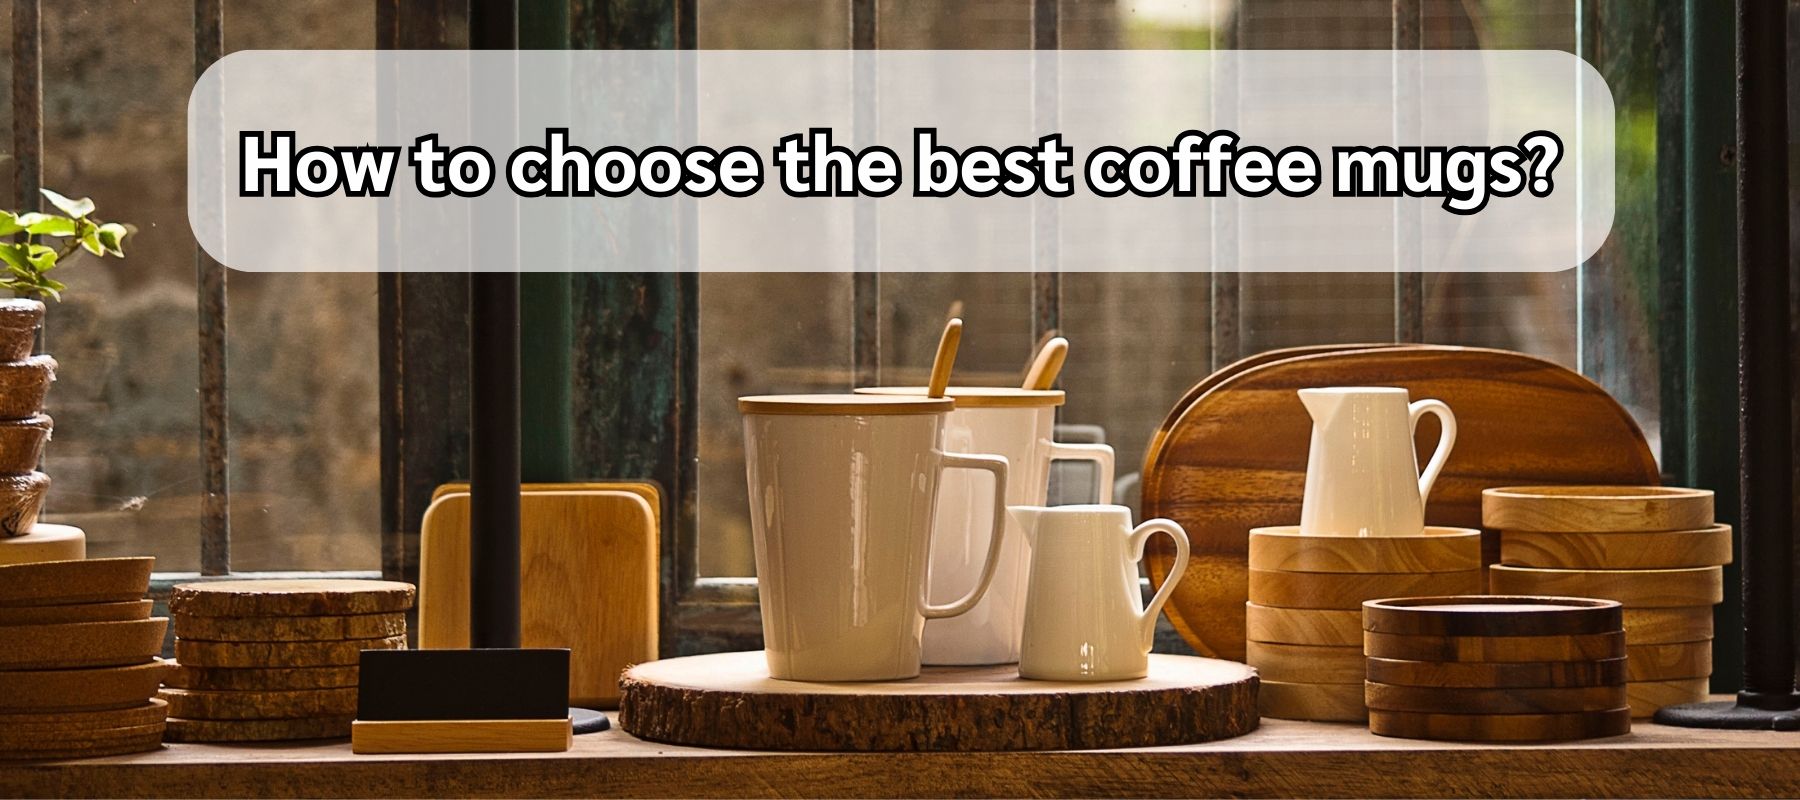 How-to-choose-the-best-coffee-mugs?